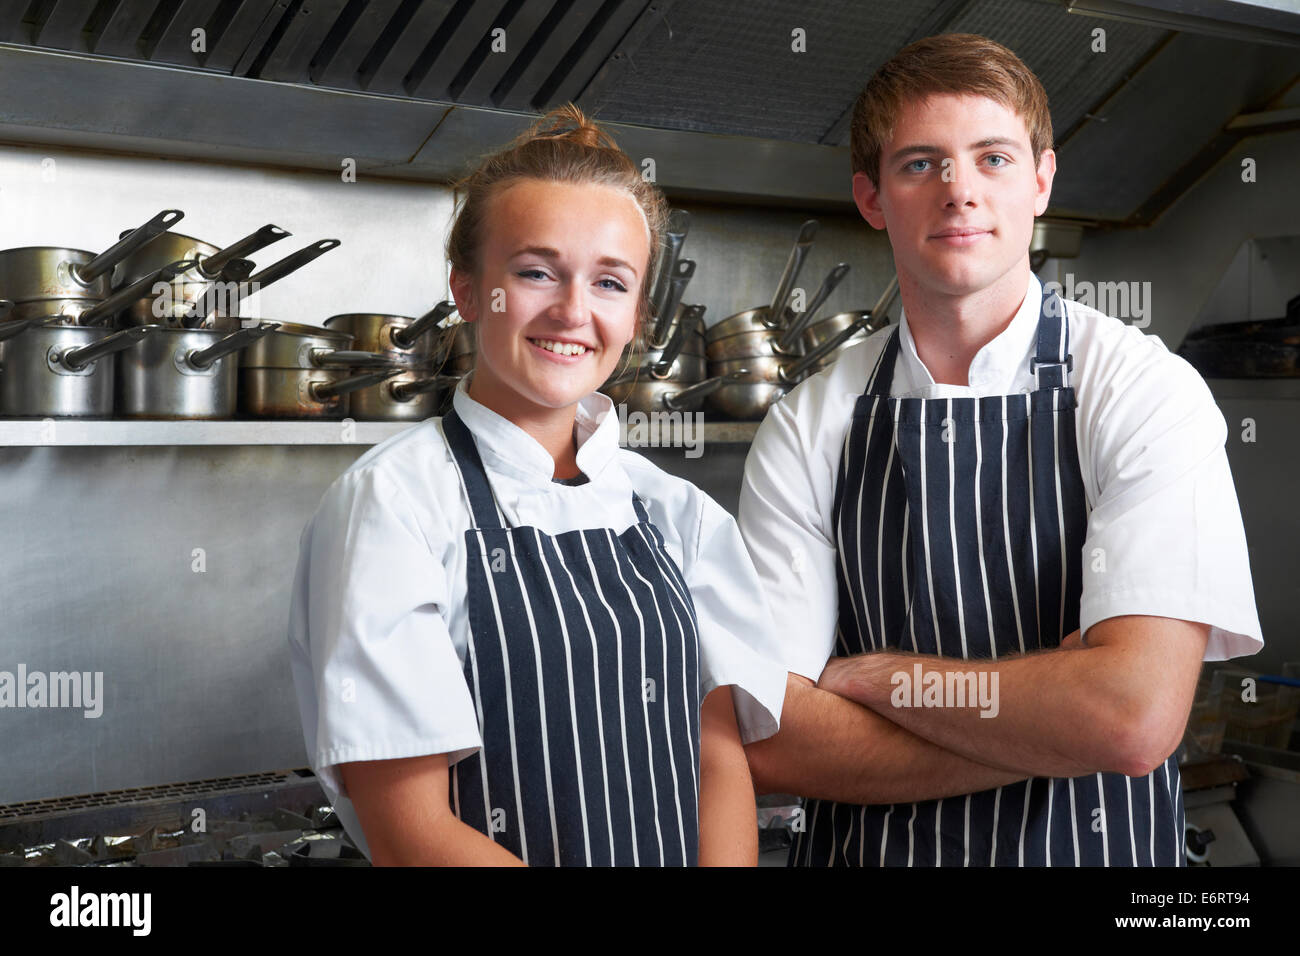 Portrait Of Chef And Trainee In Kitchen Stock Photo